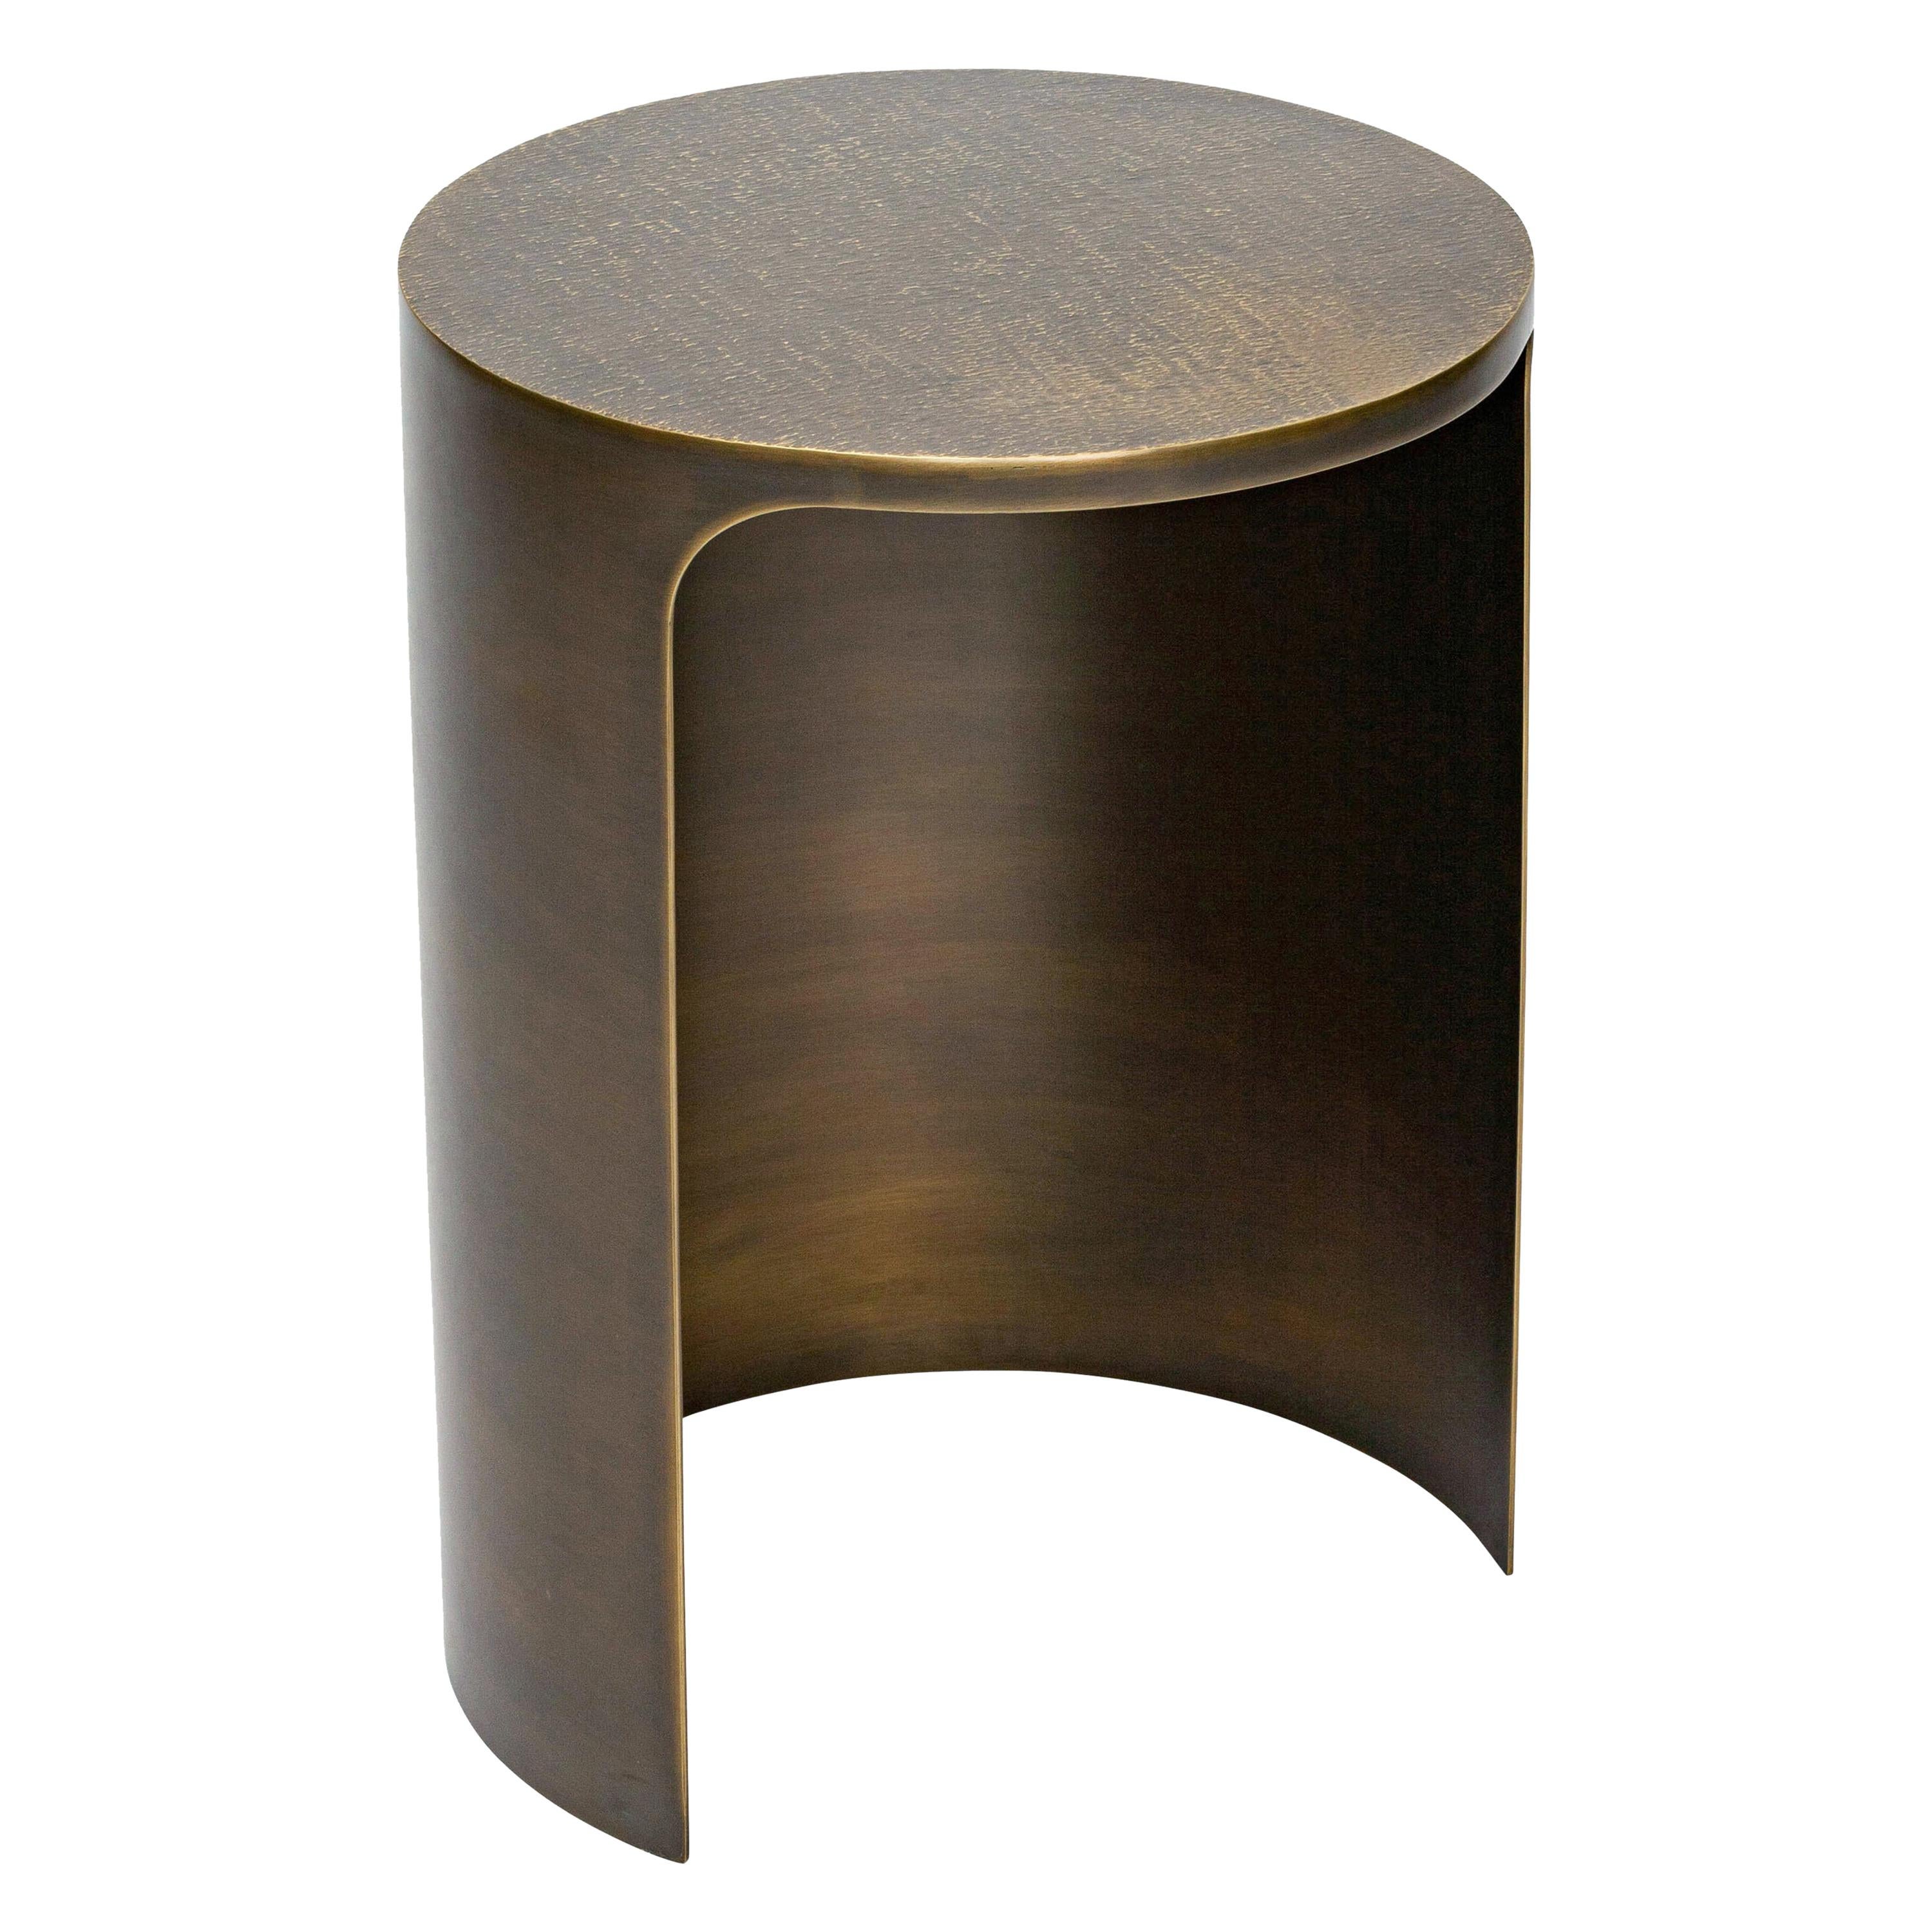 21st Century Art Deco Elie Saab Maison Hammered Brass Palace Side Table, Italy